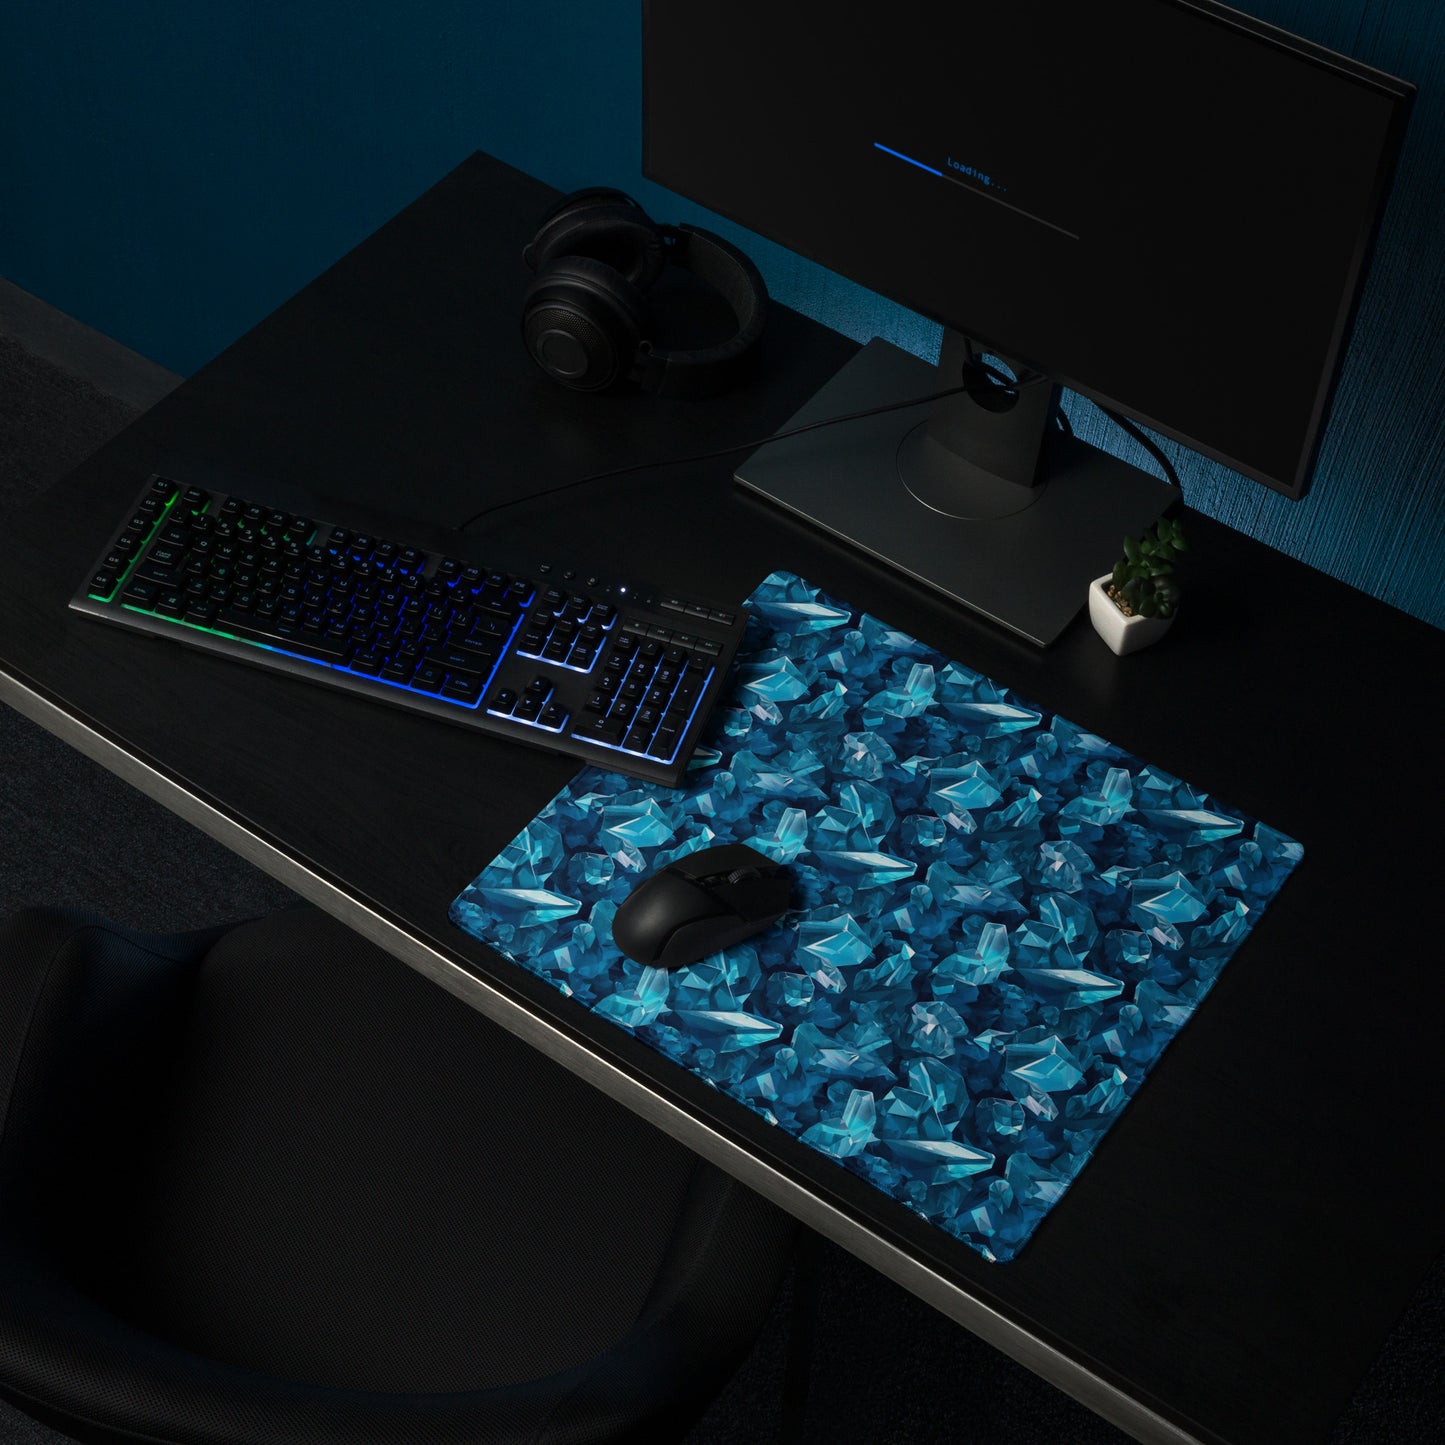 An 18" x 16" gaming desk pad with blue crystals. It sits on a black desk with a monitor, keyboard, and mouse.